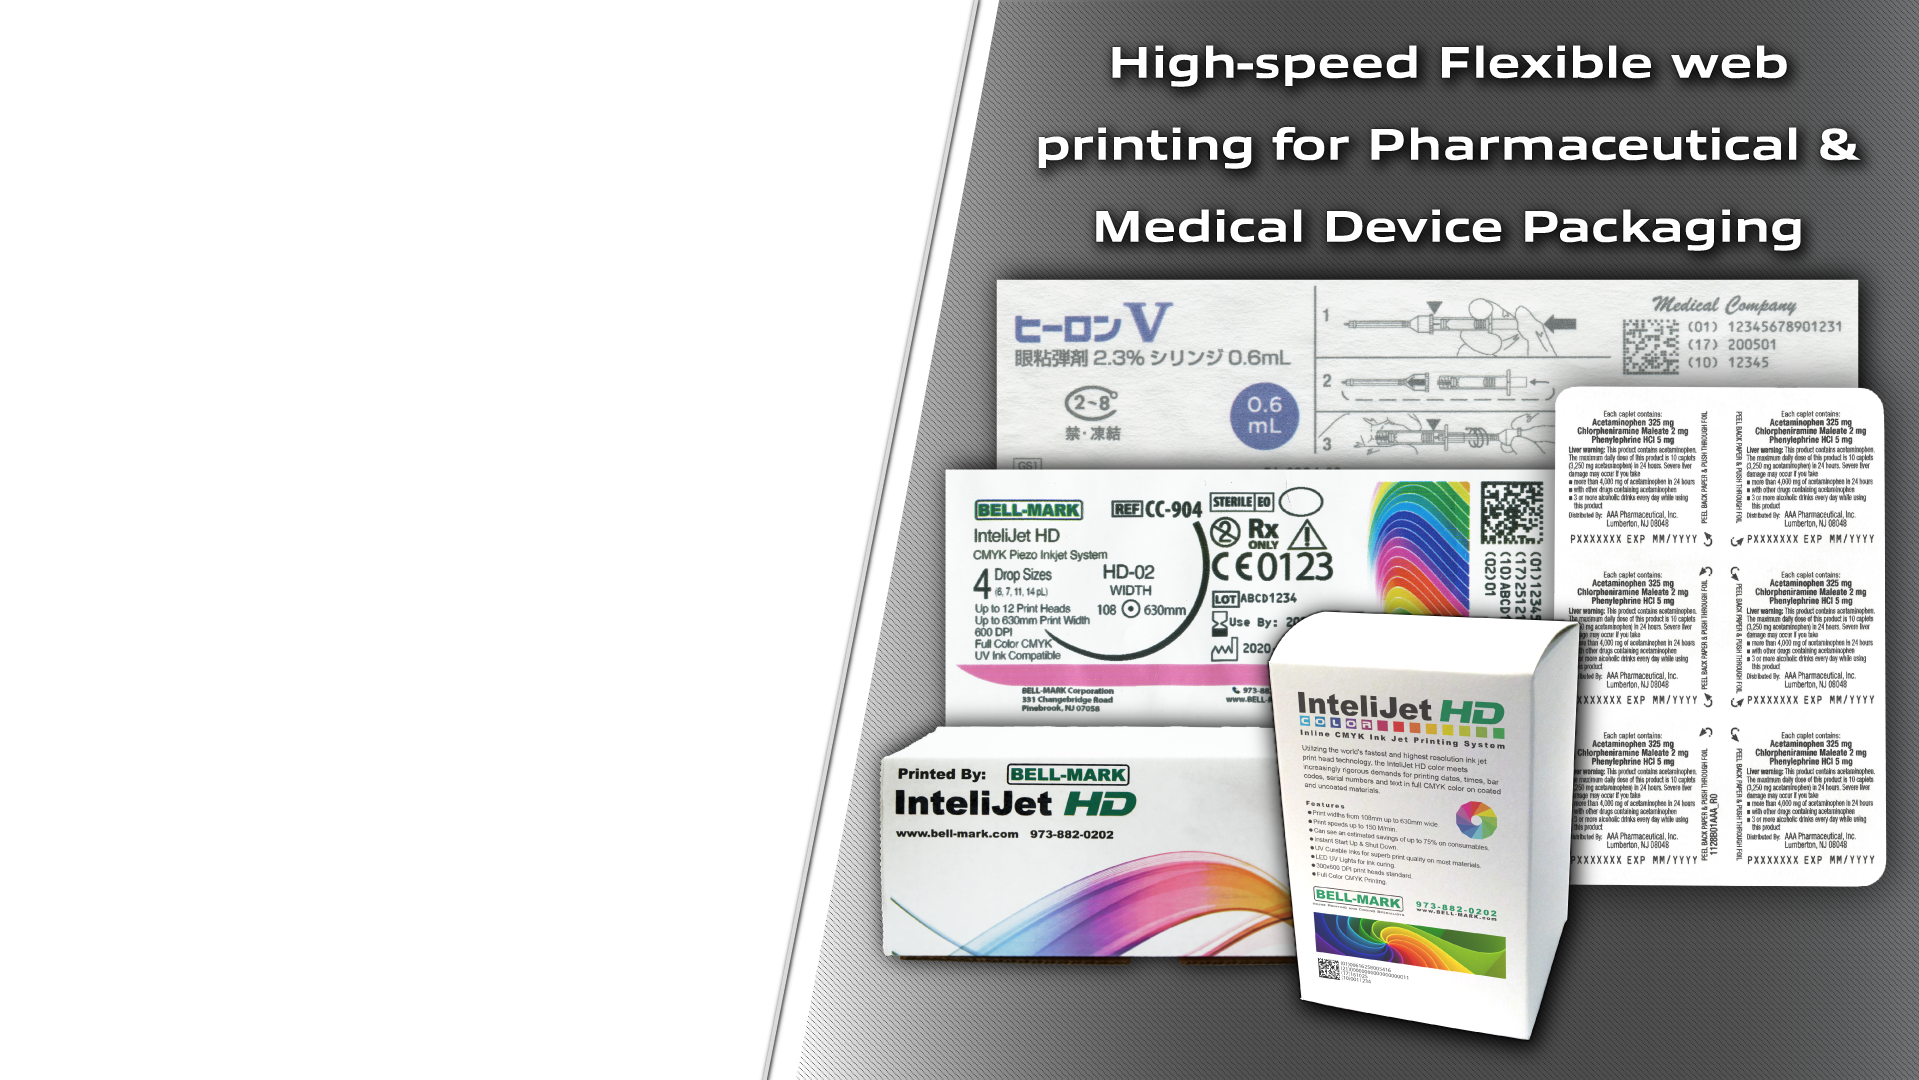 High-speed flexible printing for Pharmaceutical & Medical Device packaging industries